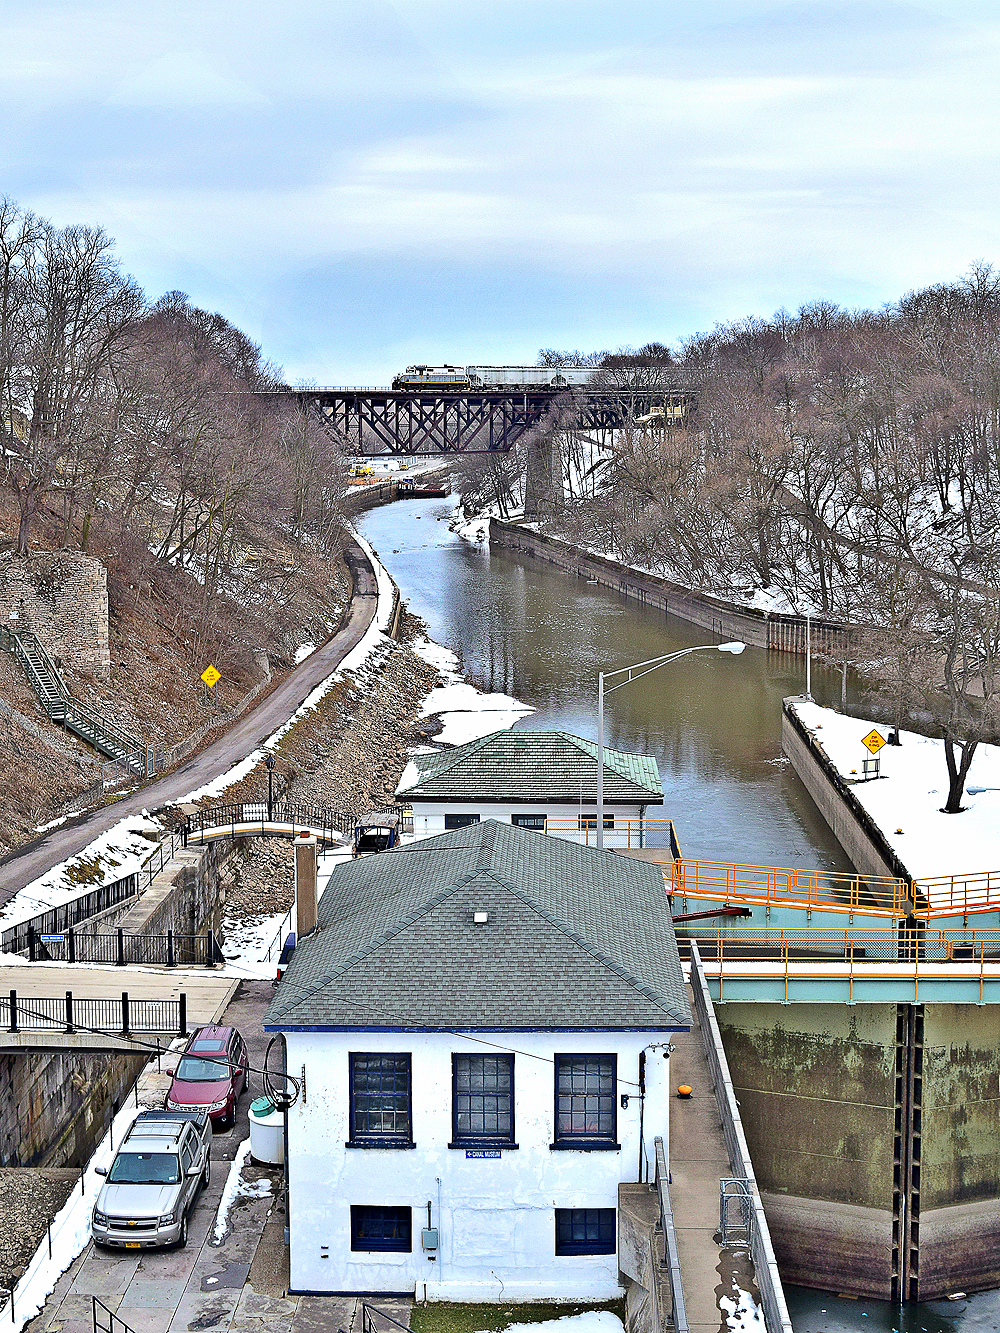 Freight train crosses bridge over a canal during winter.